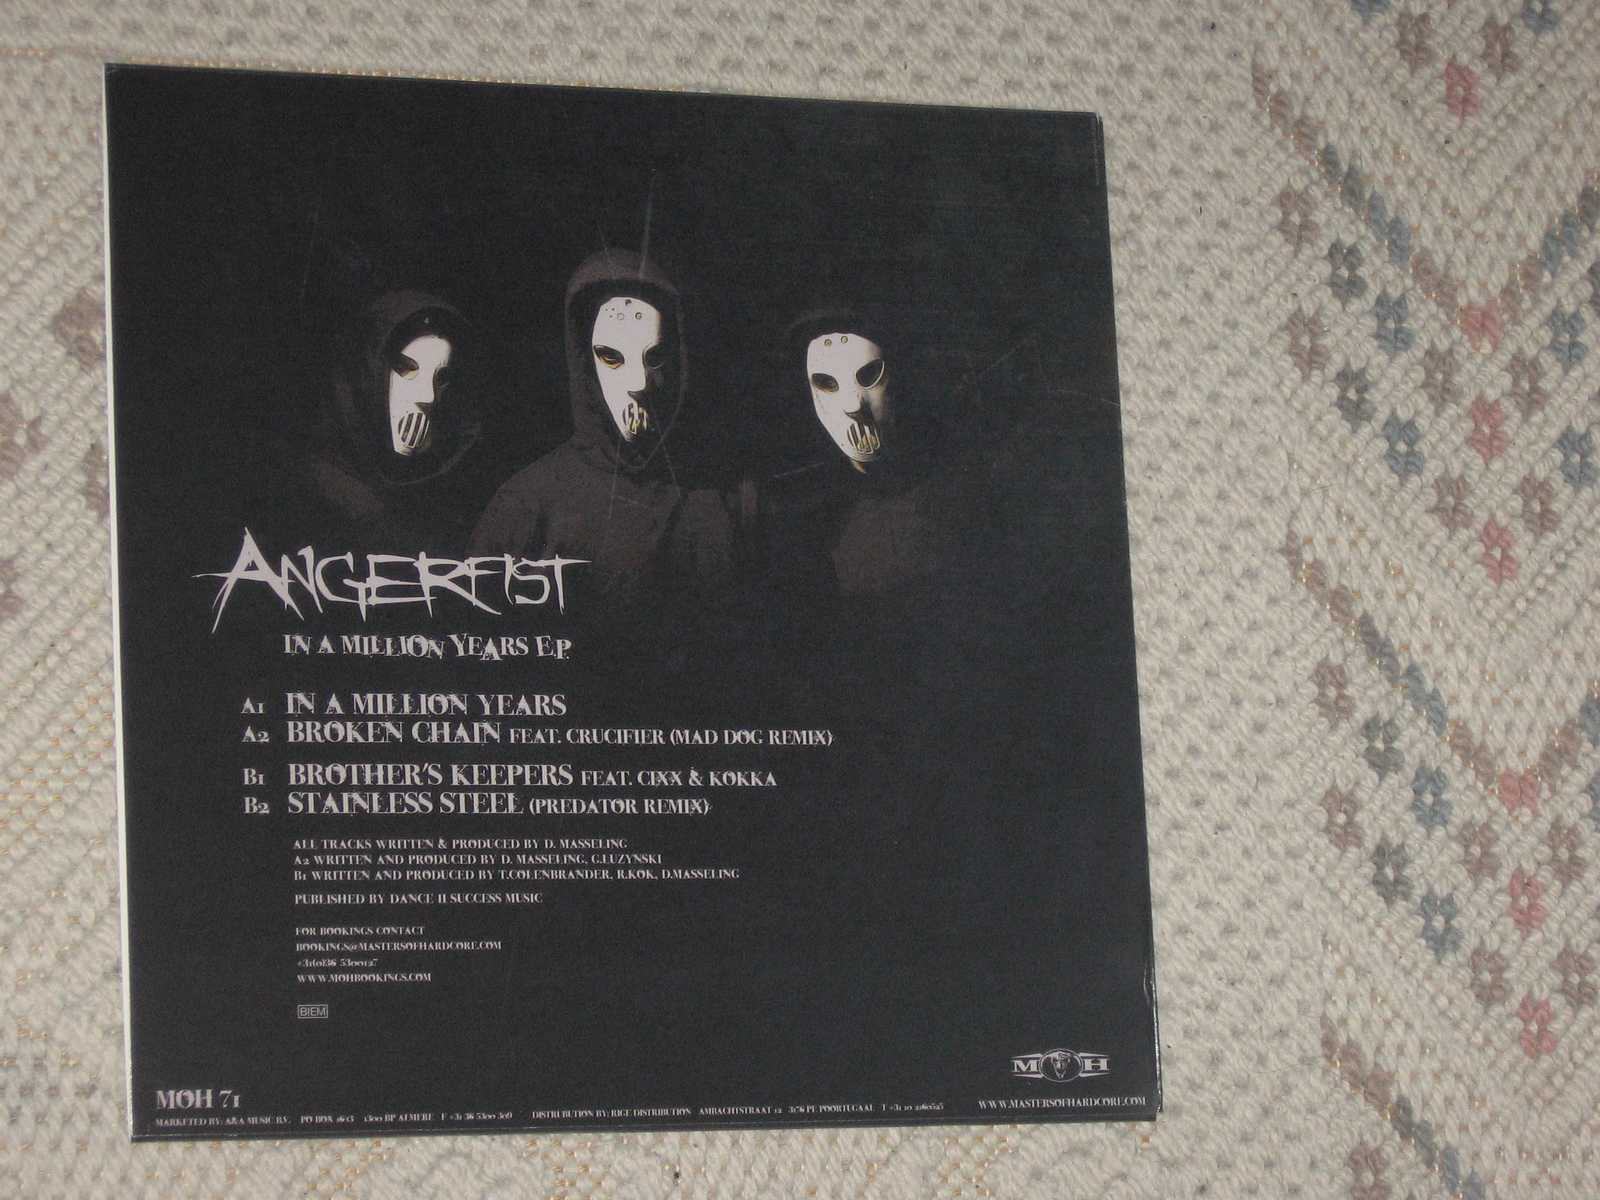 (MOH071) Angerfist - In A Million Years (back)